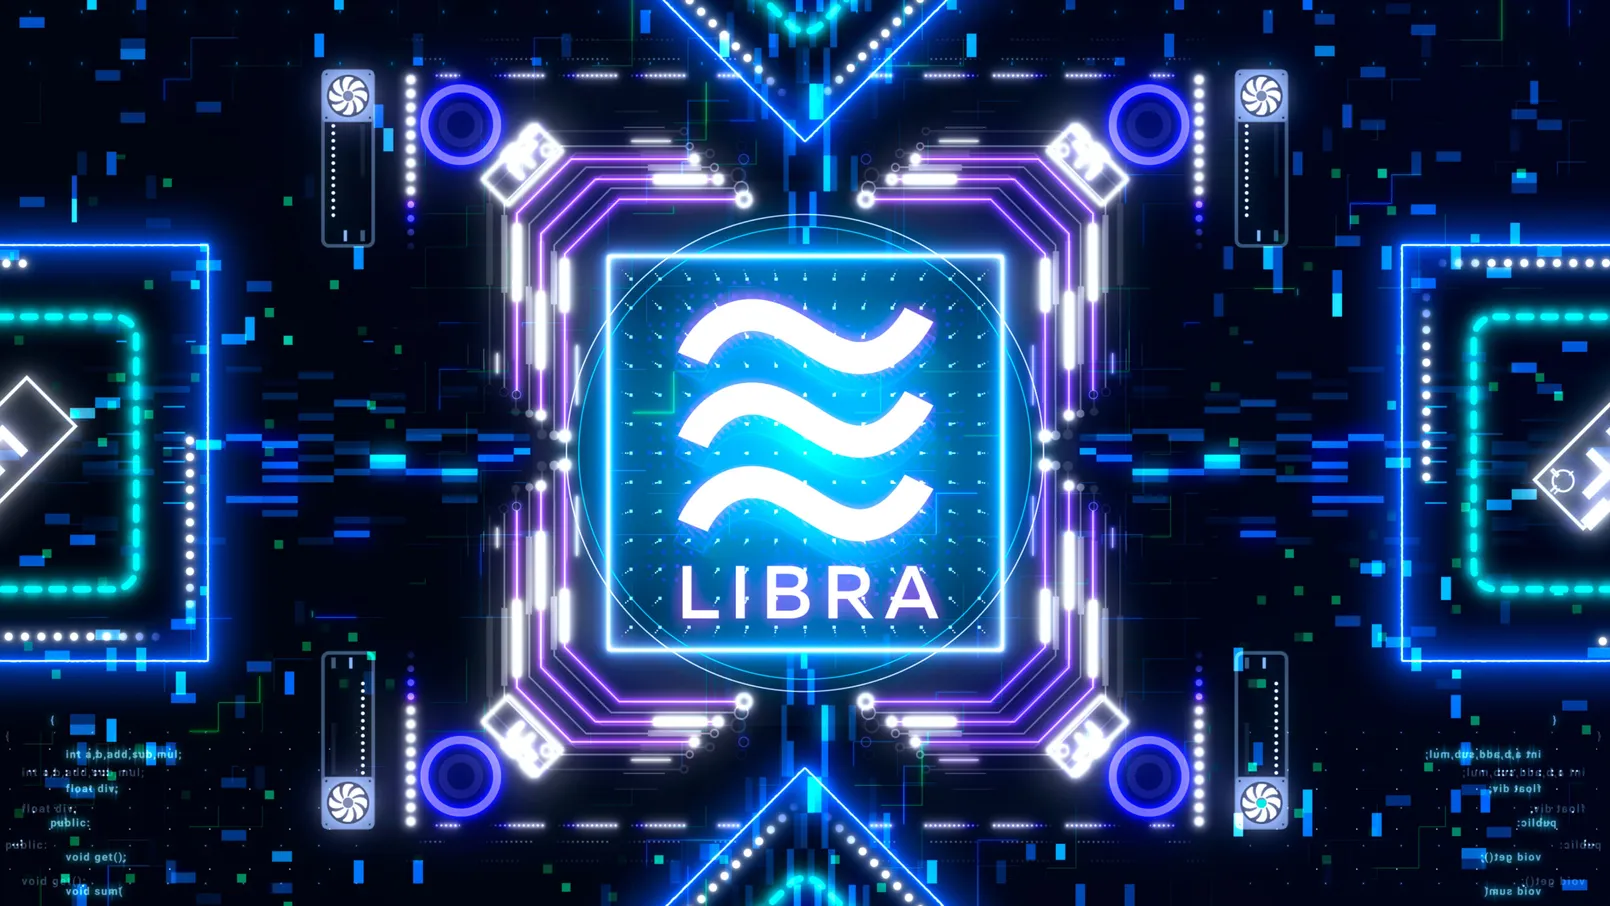 Facebook Libra Cryptocurrency Shutterstock 1428716804 1 Scaled.jpg